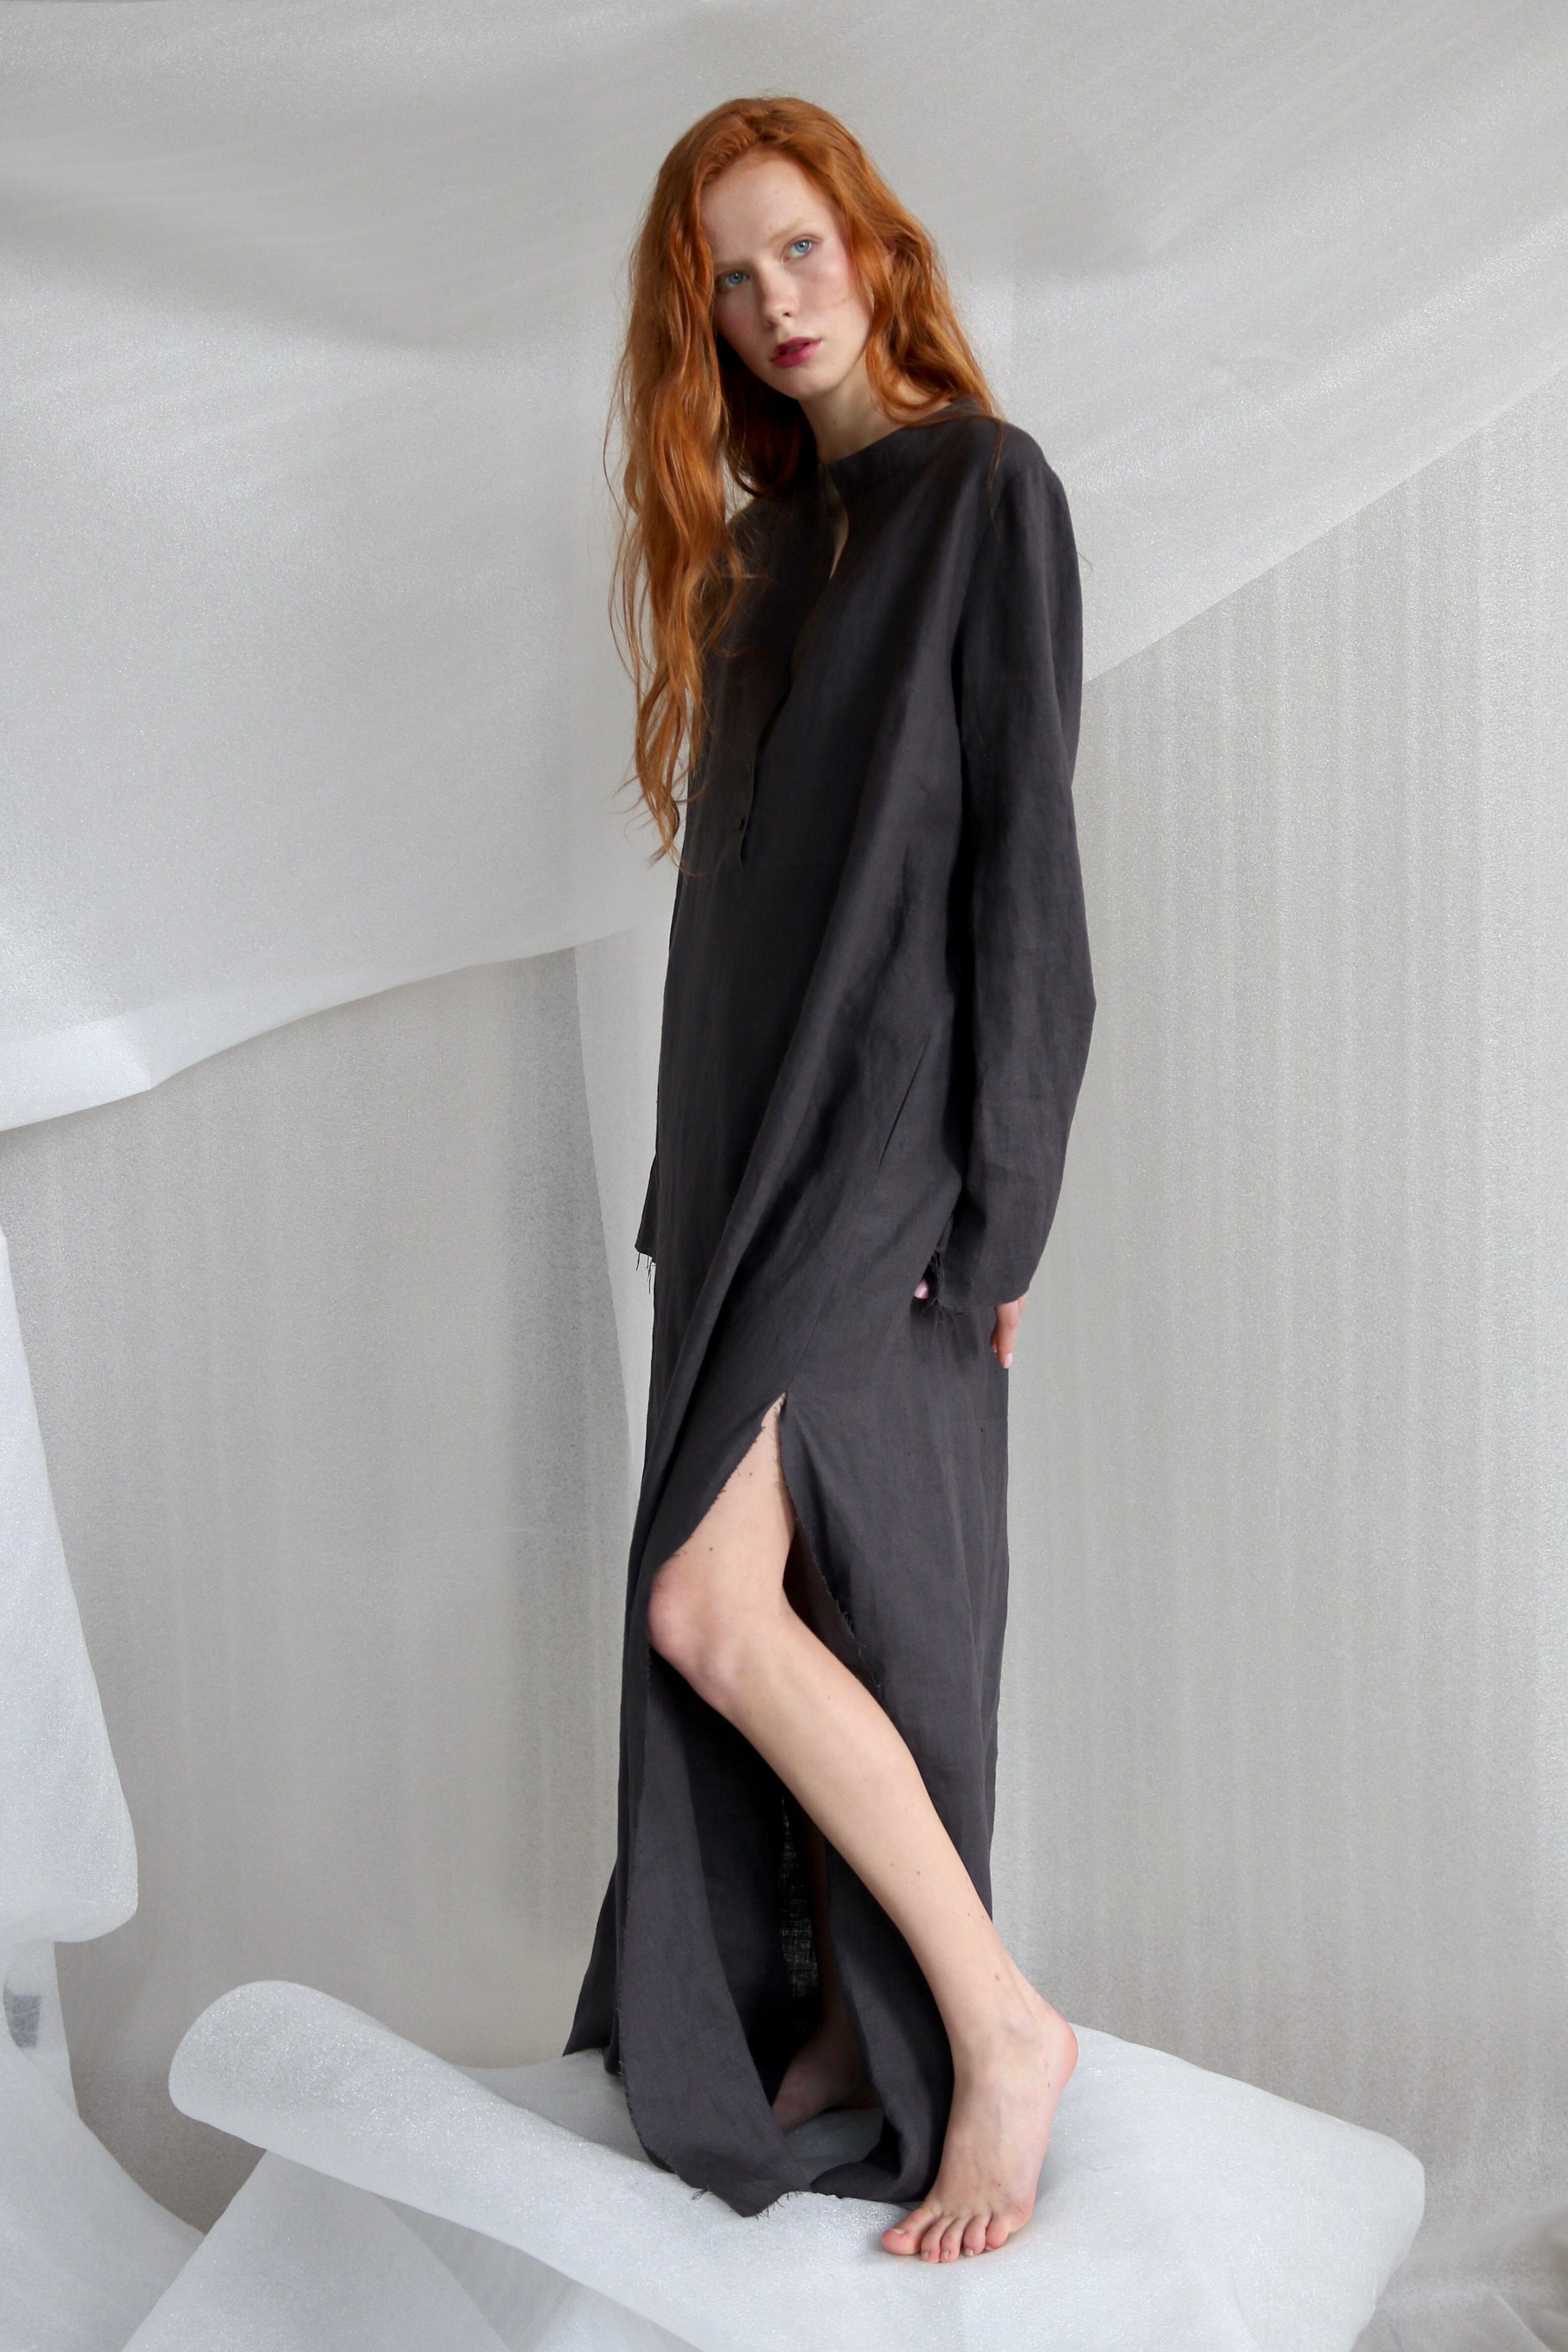  Anthracite Oversized Linen Dress Product Amoralle